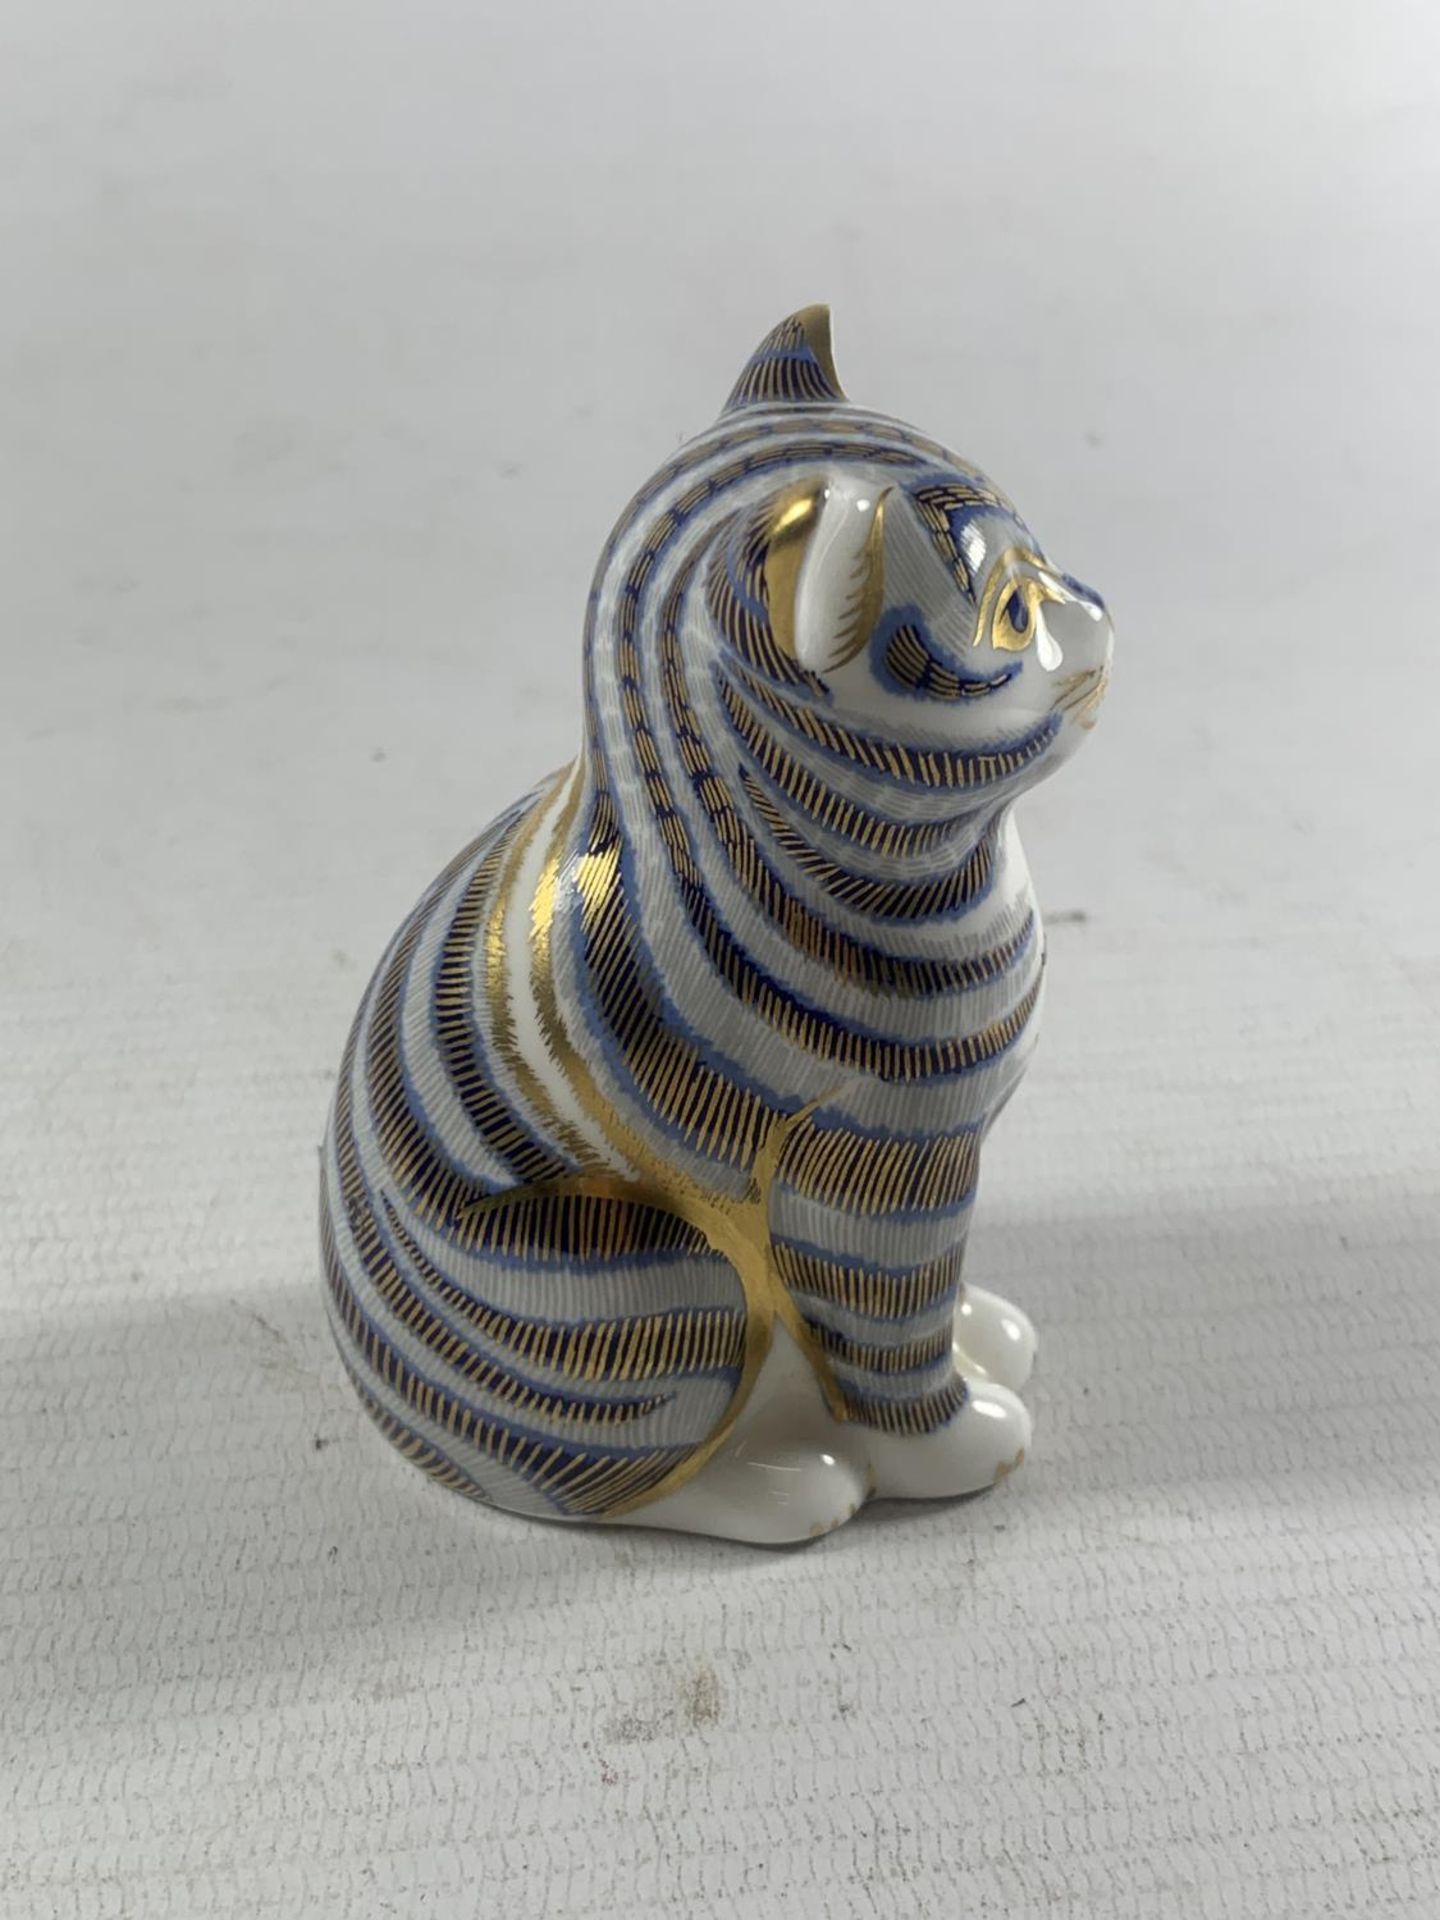 A ROYAL CROWN DERBY SITTING KITTEN - Image 2 of 4